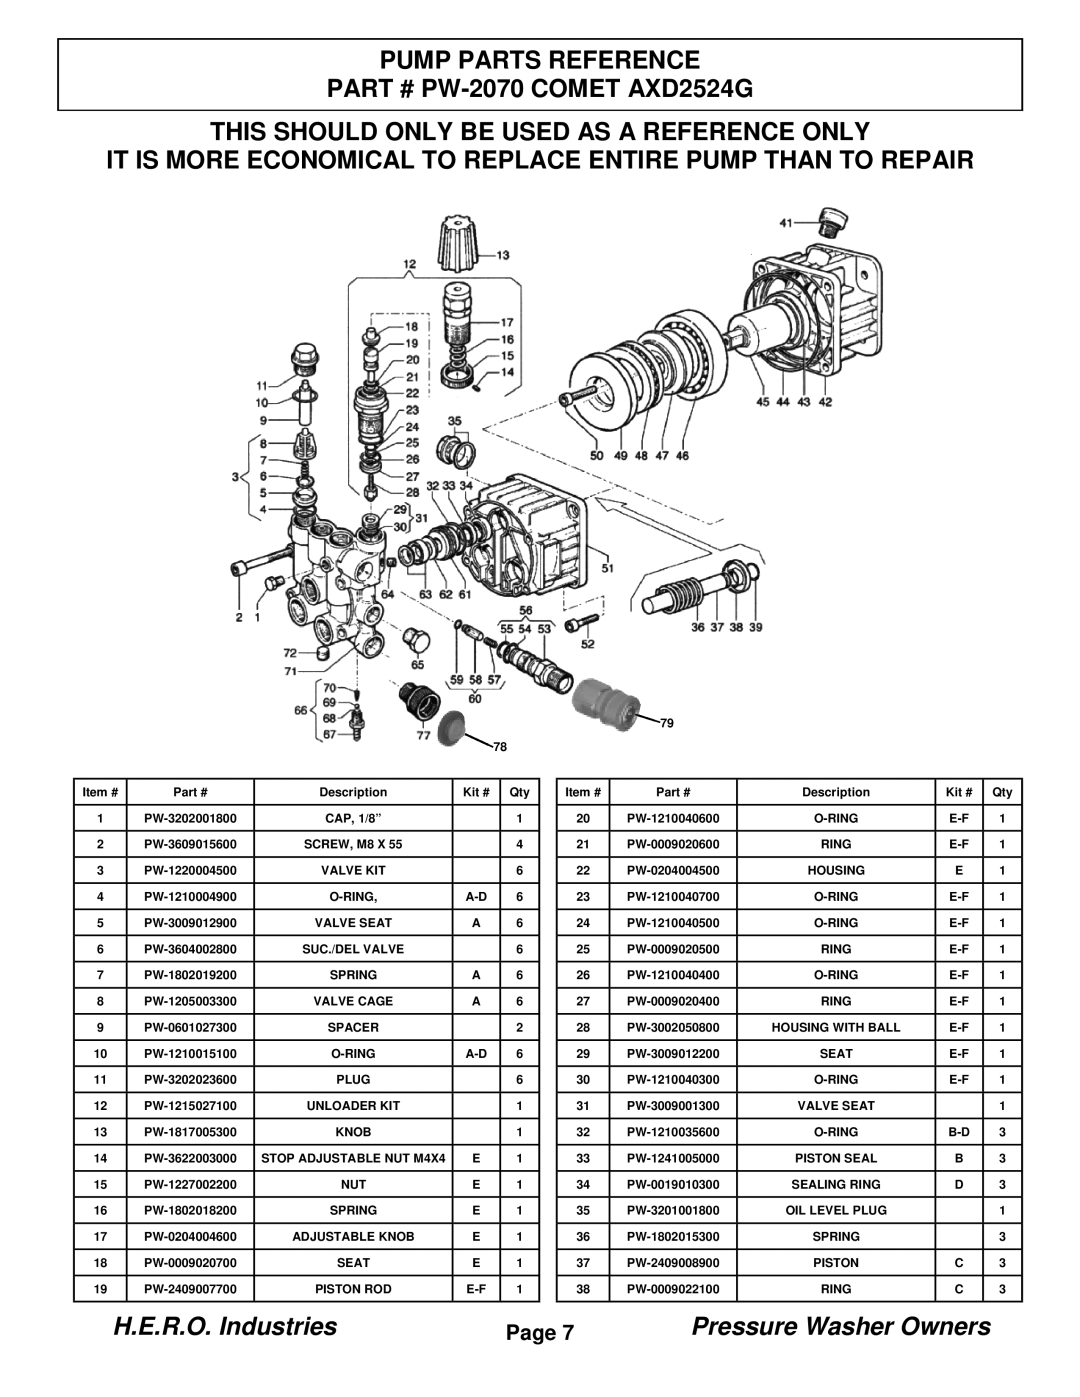 I.C.T.C. Holdings Corporation PW2424-LD manual PUMP PARTS REFERENCE PART # PW-2070 COMET AXD2524G, H.E.R.O. Industries 